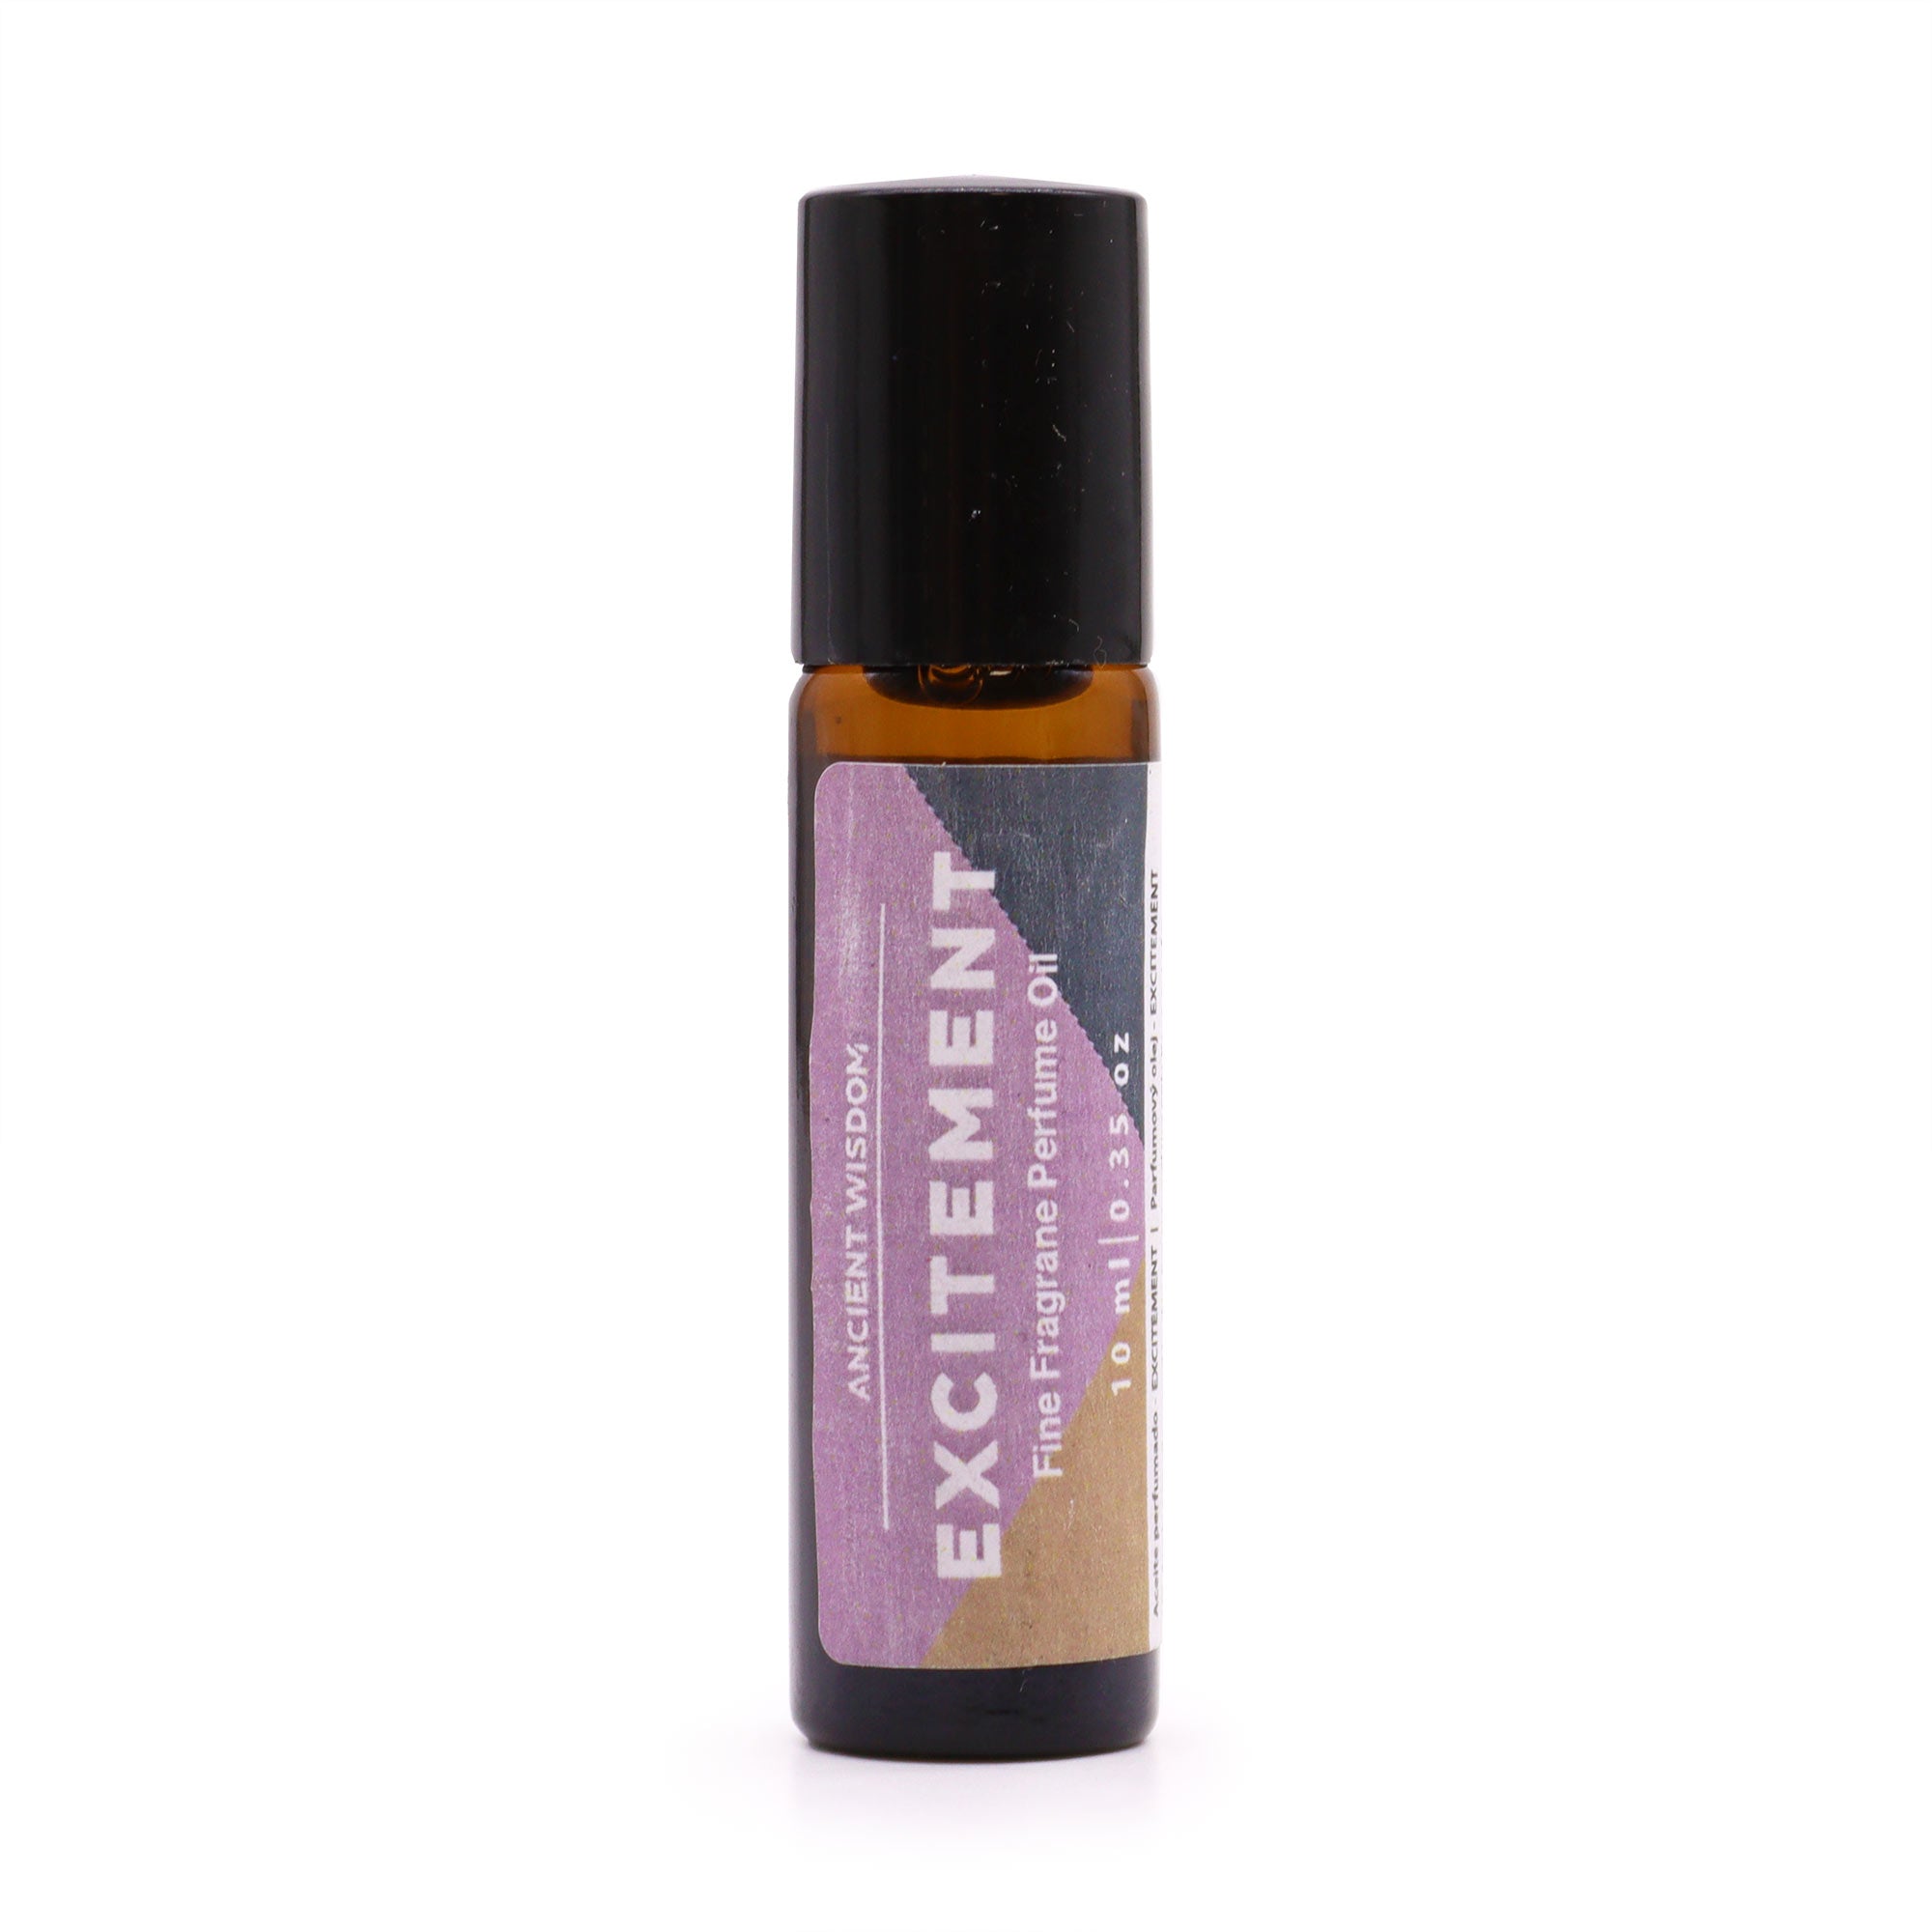 Excitement Fine Fragrance Perfume Oil 10ml - Inspired by &